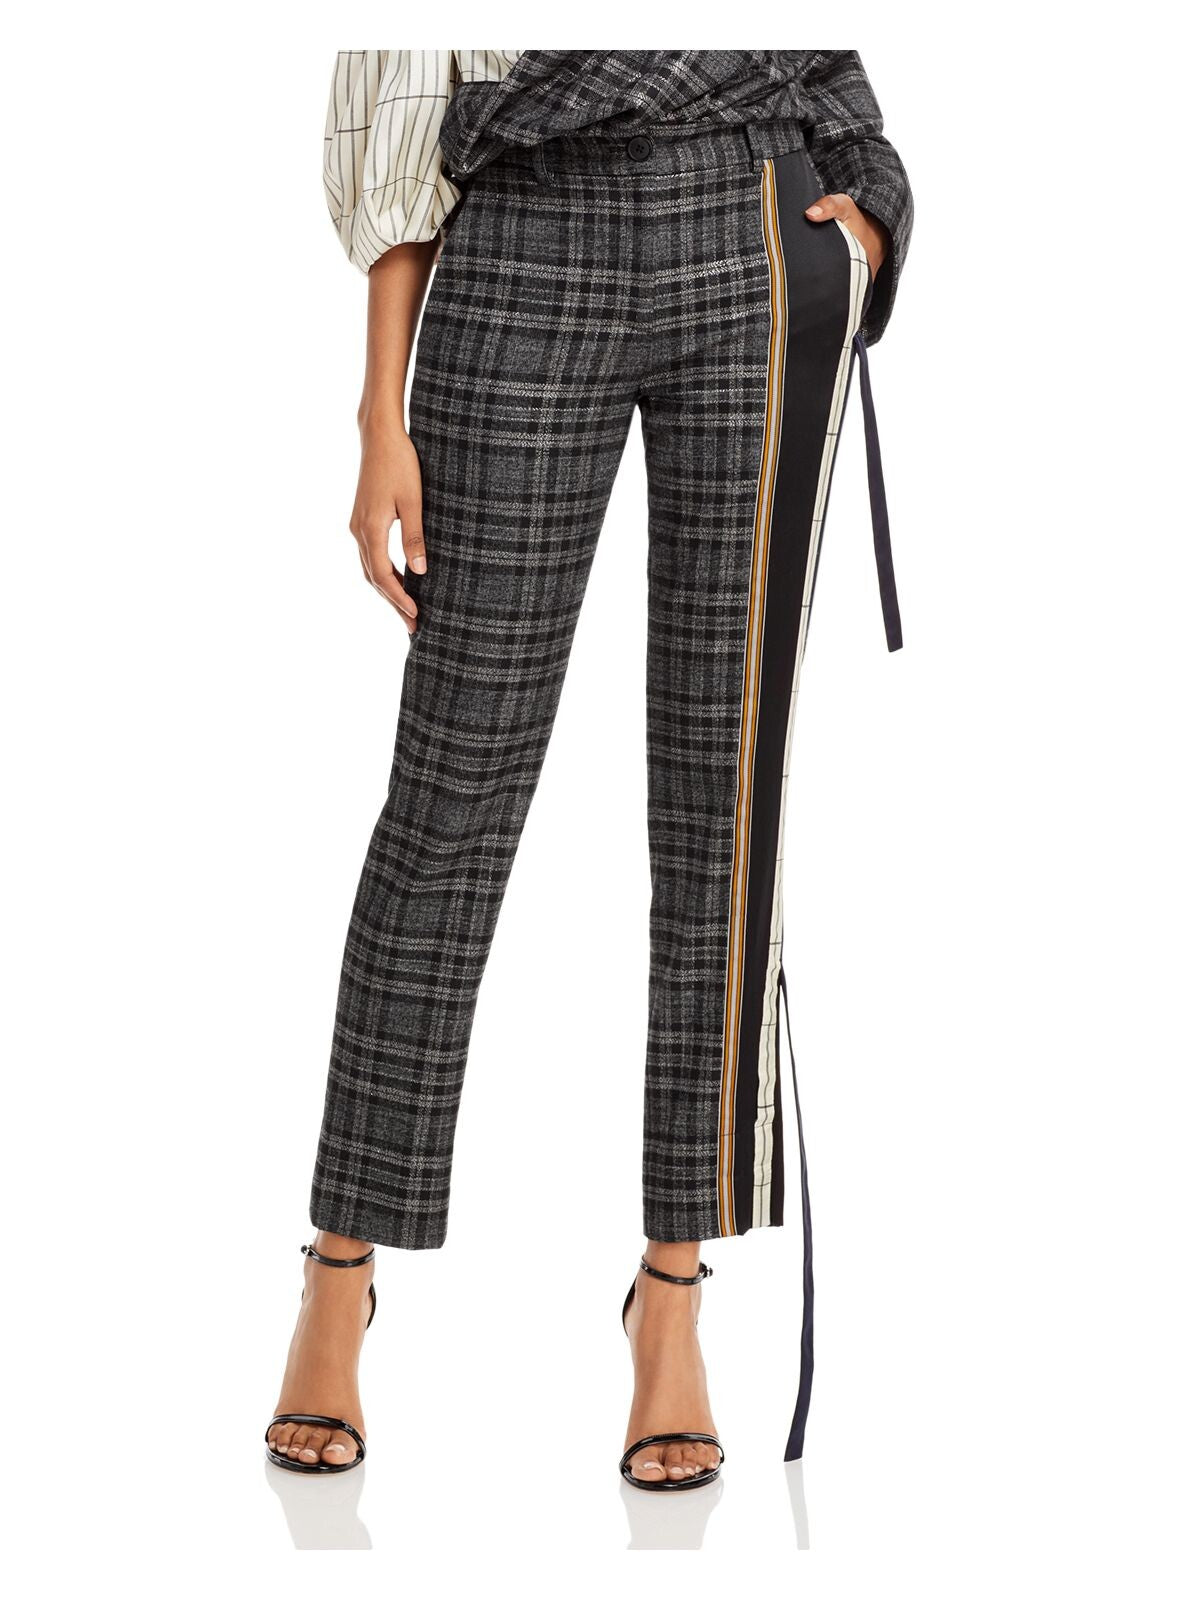 HELLESSY Womens Black Pocketed Zippered Tie Accents Metallic Plaid Straight leg Pants 4